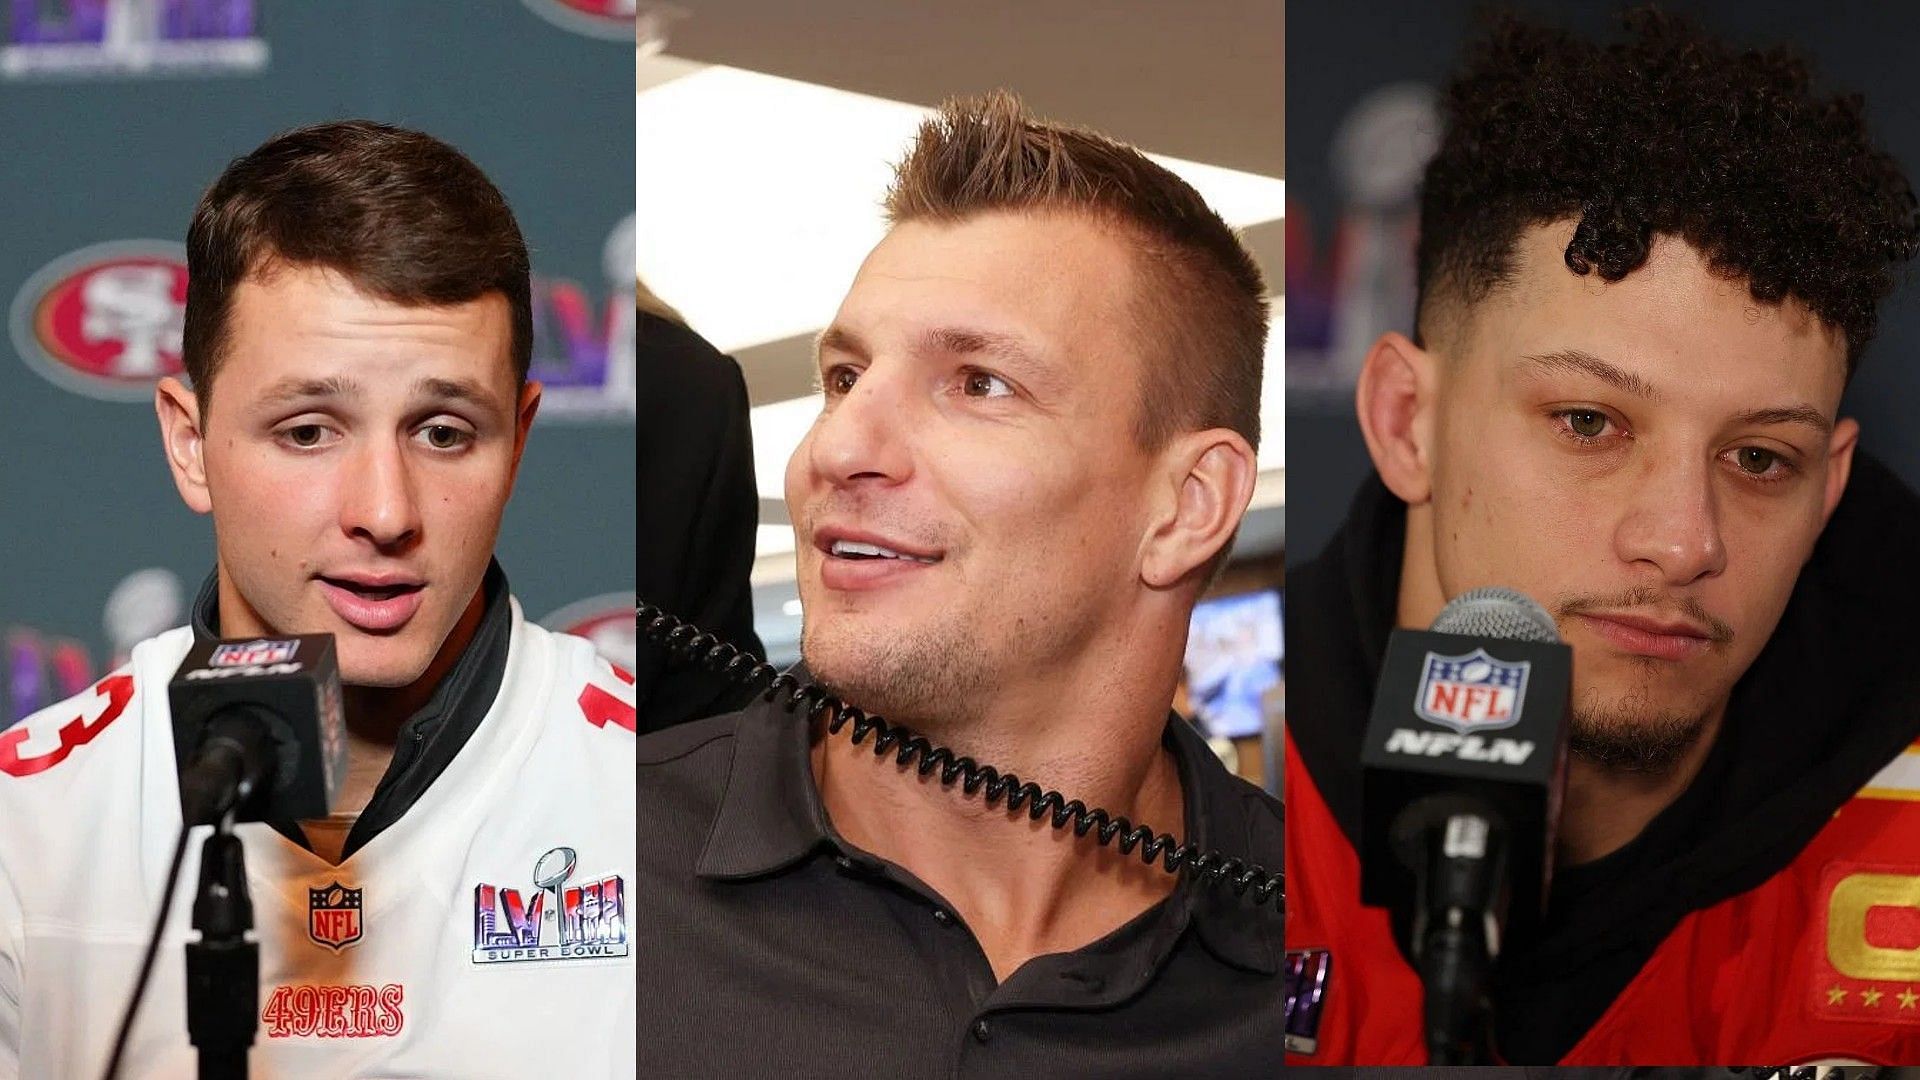 11 NFL players drop Super Bowl predictions for Patrick Mahomes vs Brock Purdy showdown feat. Rob Gronkowski